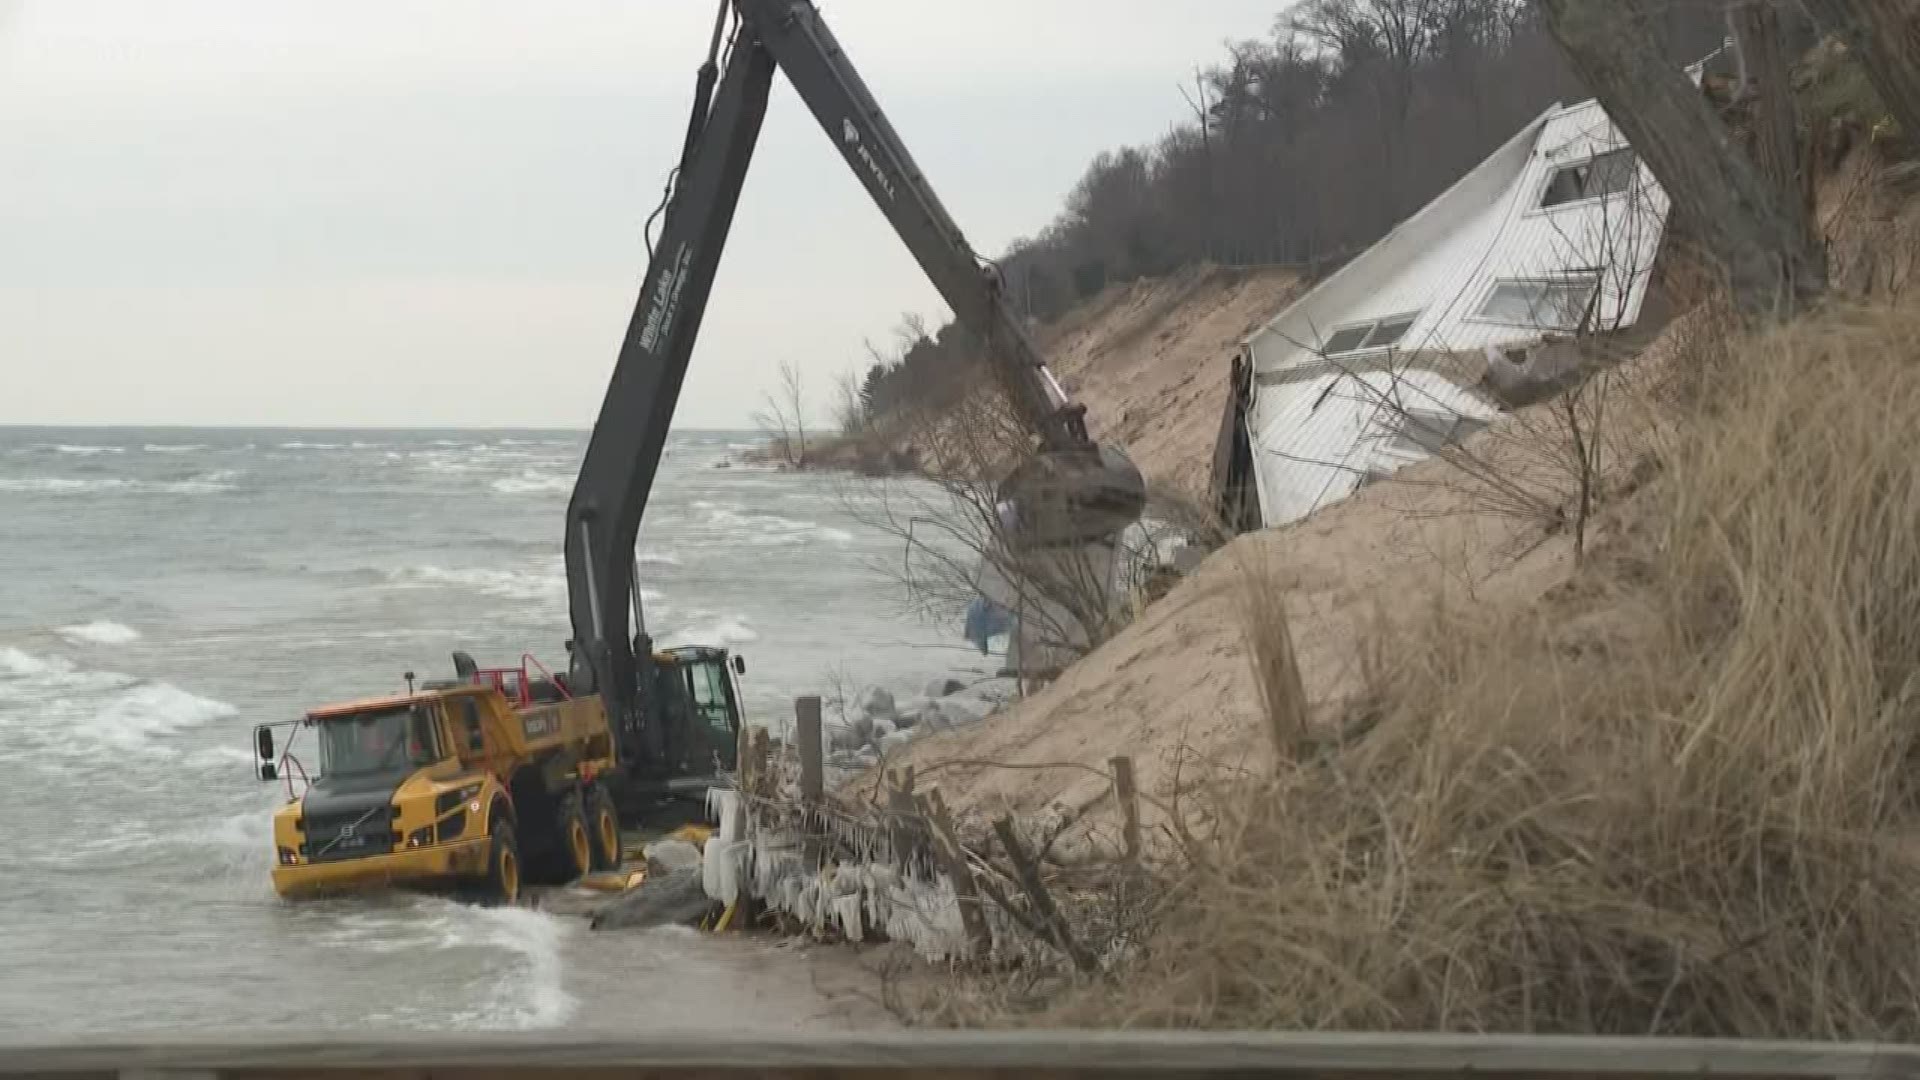 The 100-year-old cottage in Muskegon County's White River Township slipped off its foundation on New Year's Eve and it's been dangling about the water ever since.